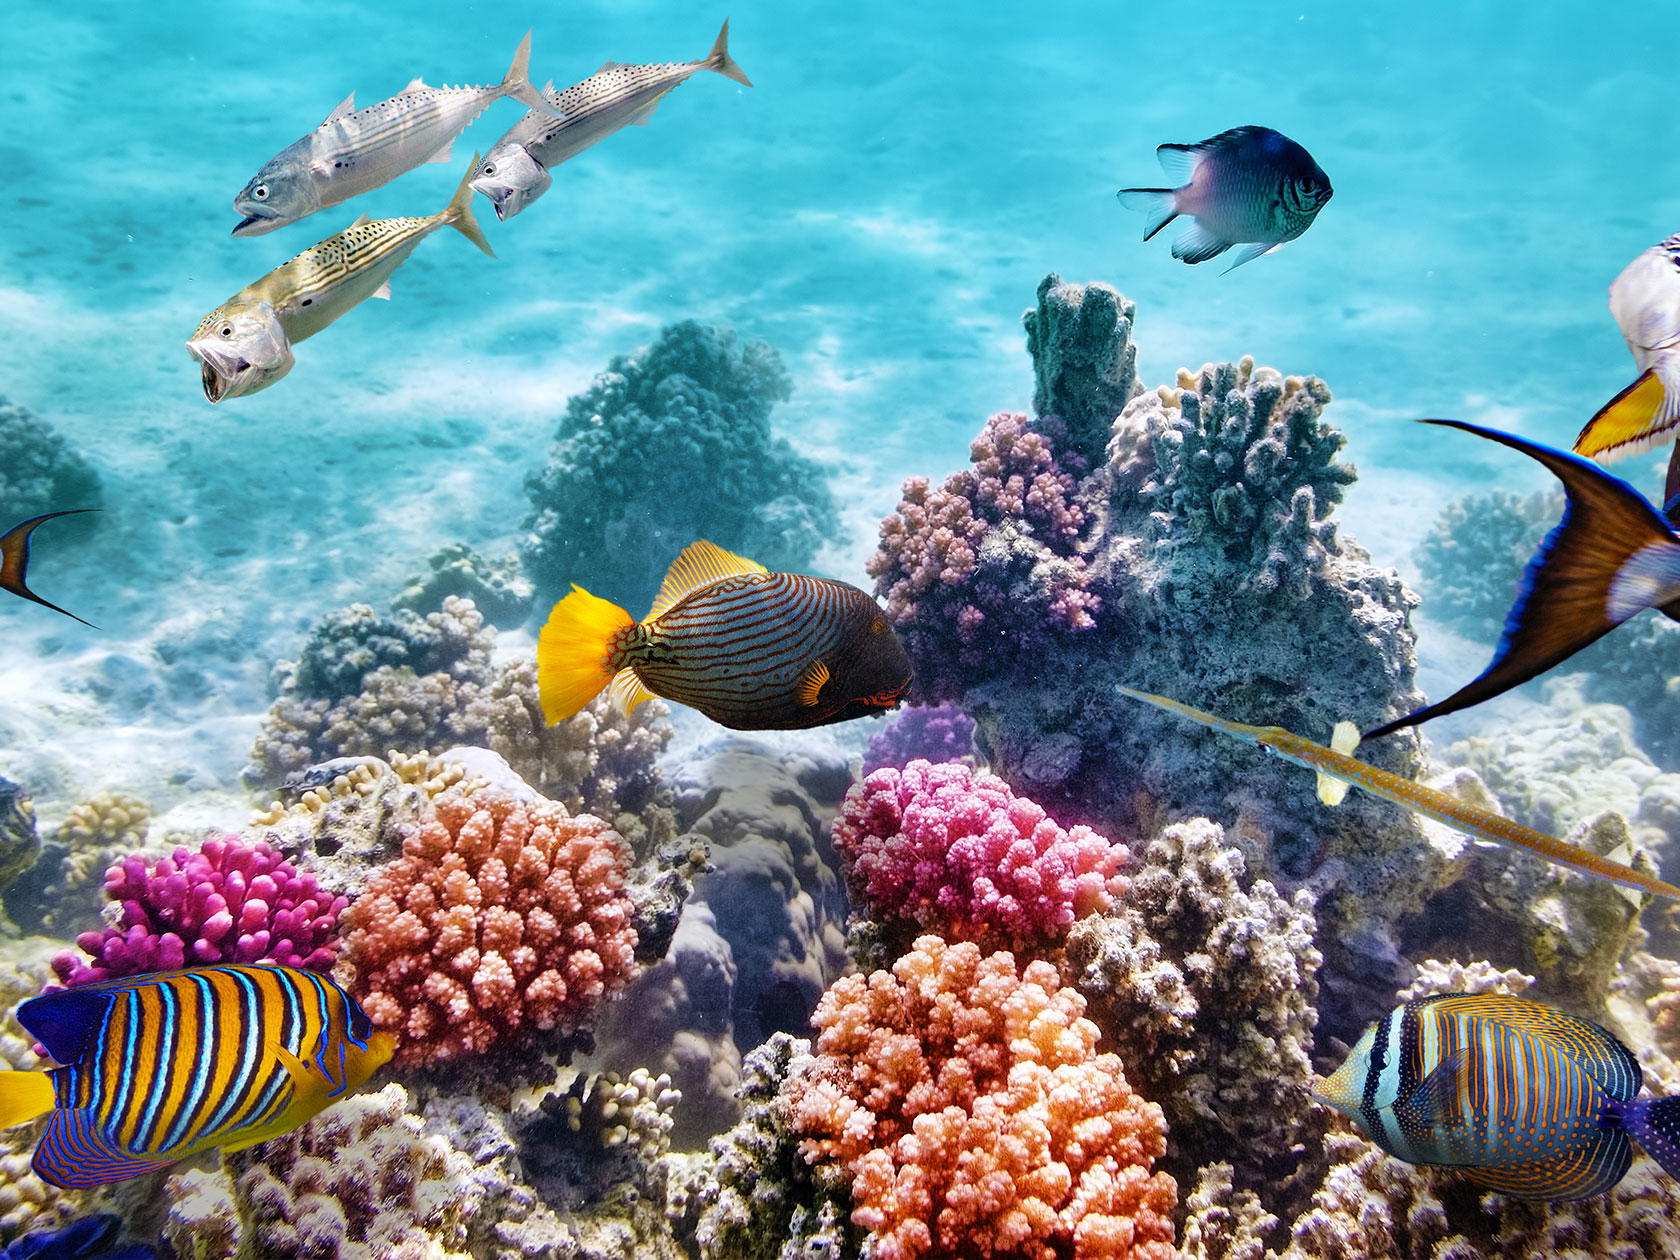 Scuba diving in underwater world with corals and tropical fish.